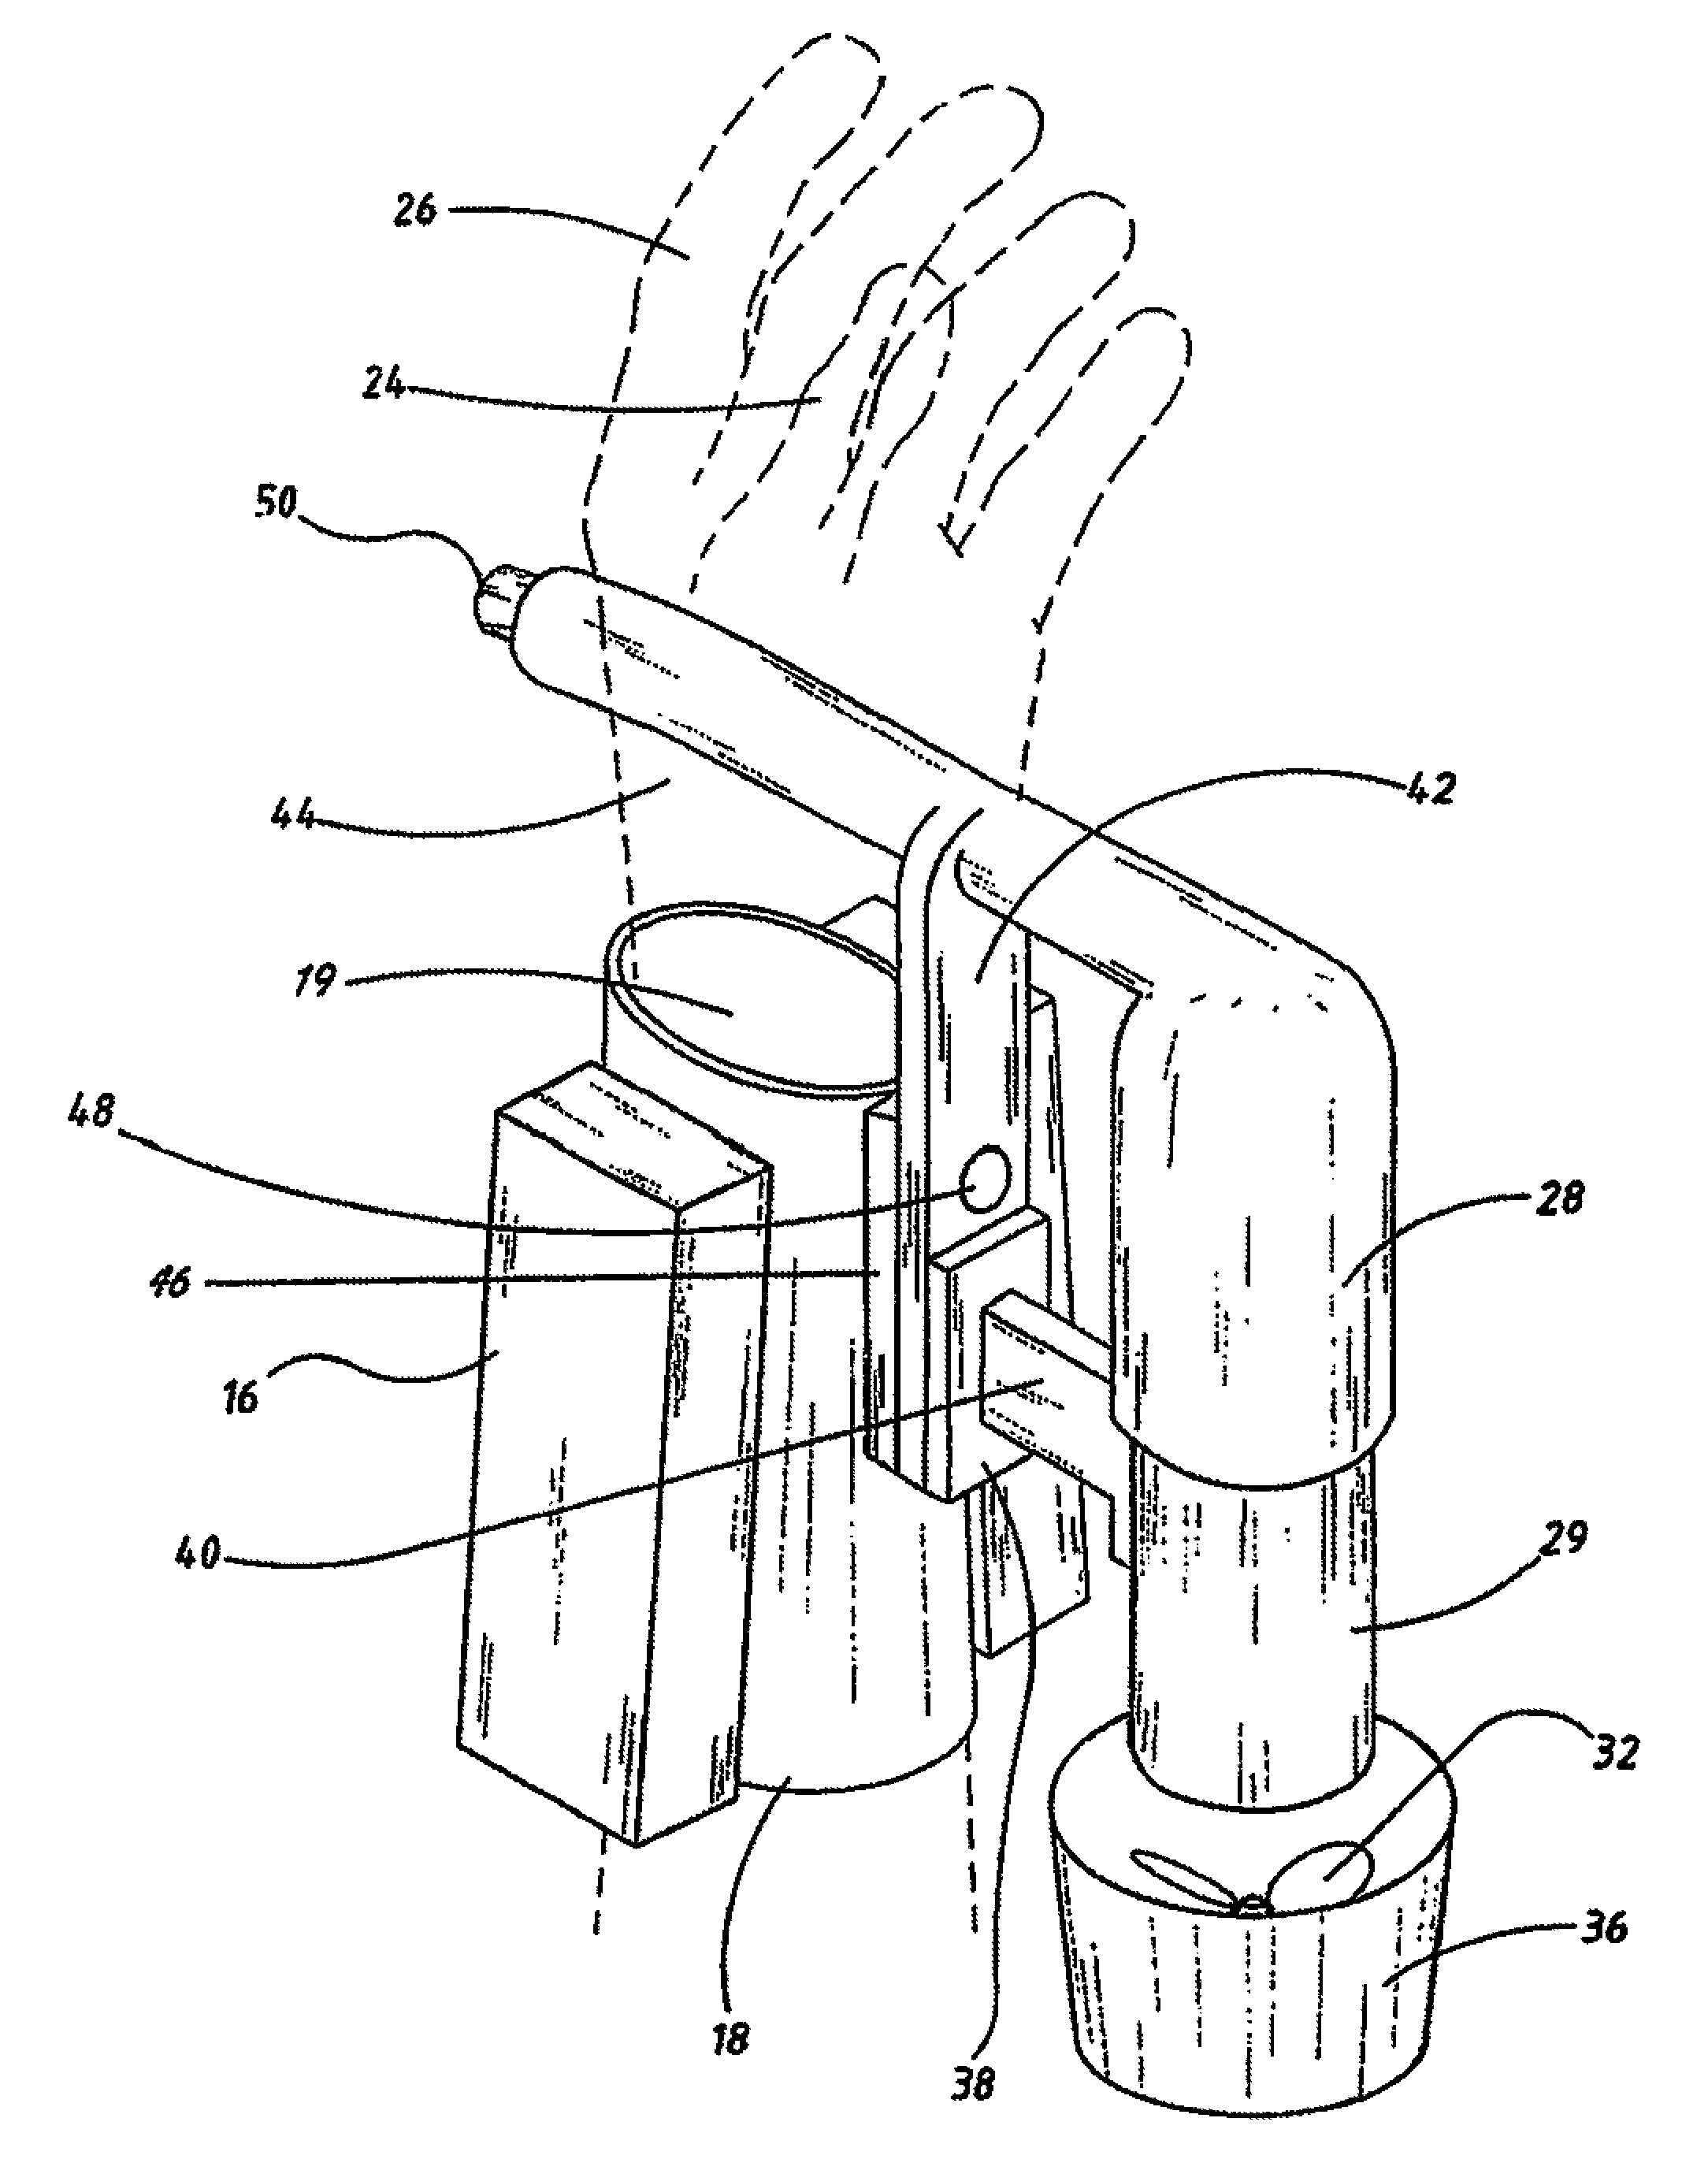 Propulsion system for use by a swimmer